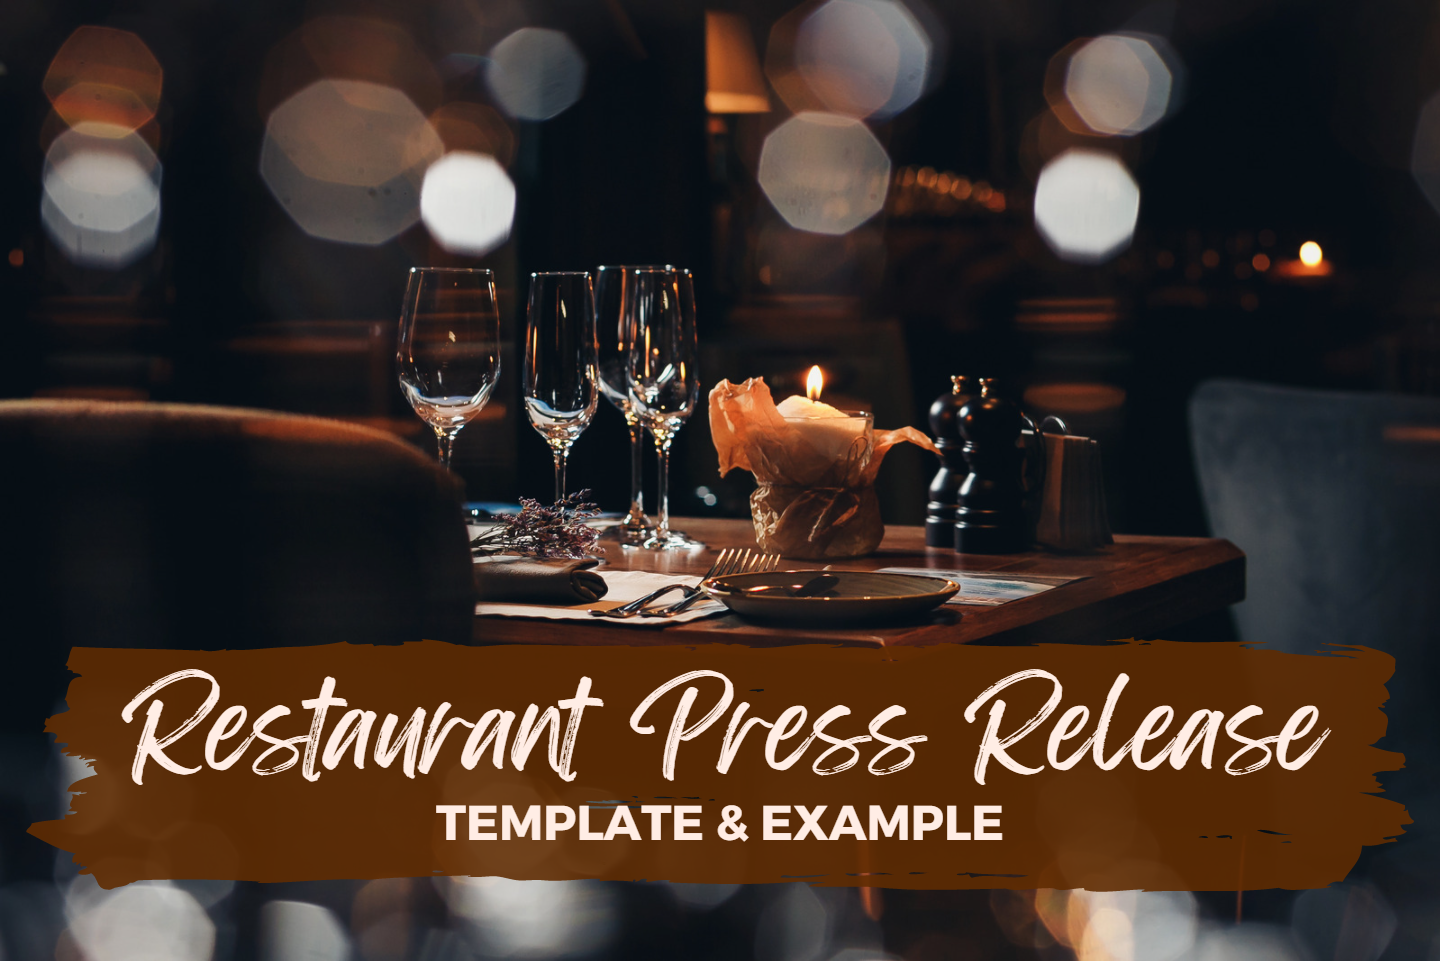 Restaurant Press Release Template & Example